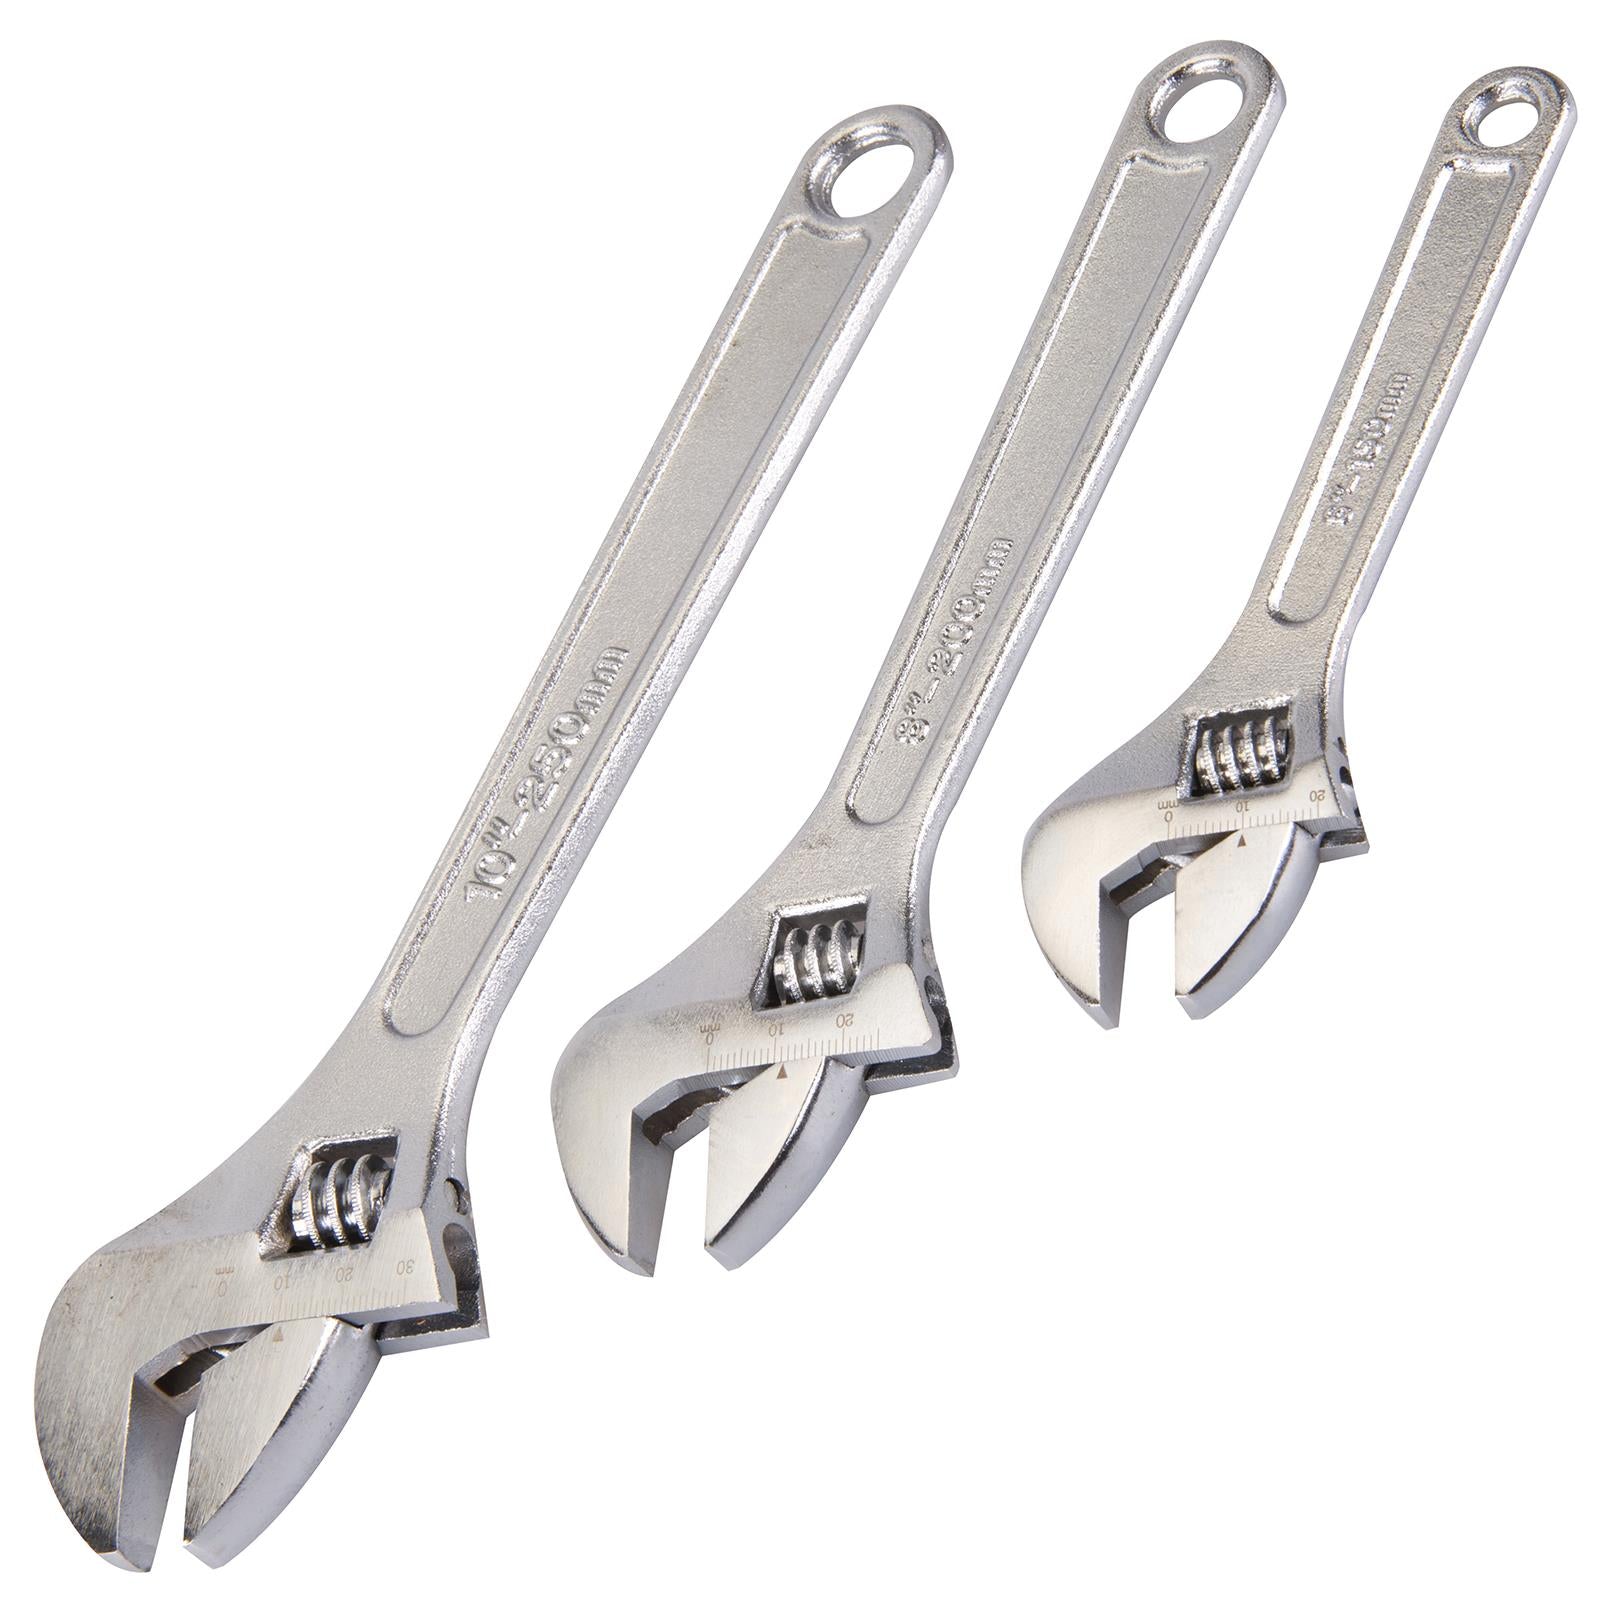 Silverline Adjustable Wrench Set 3 Piece 150mm 200mm and 250mm